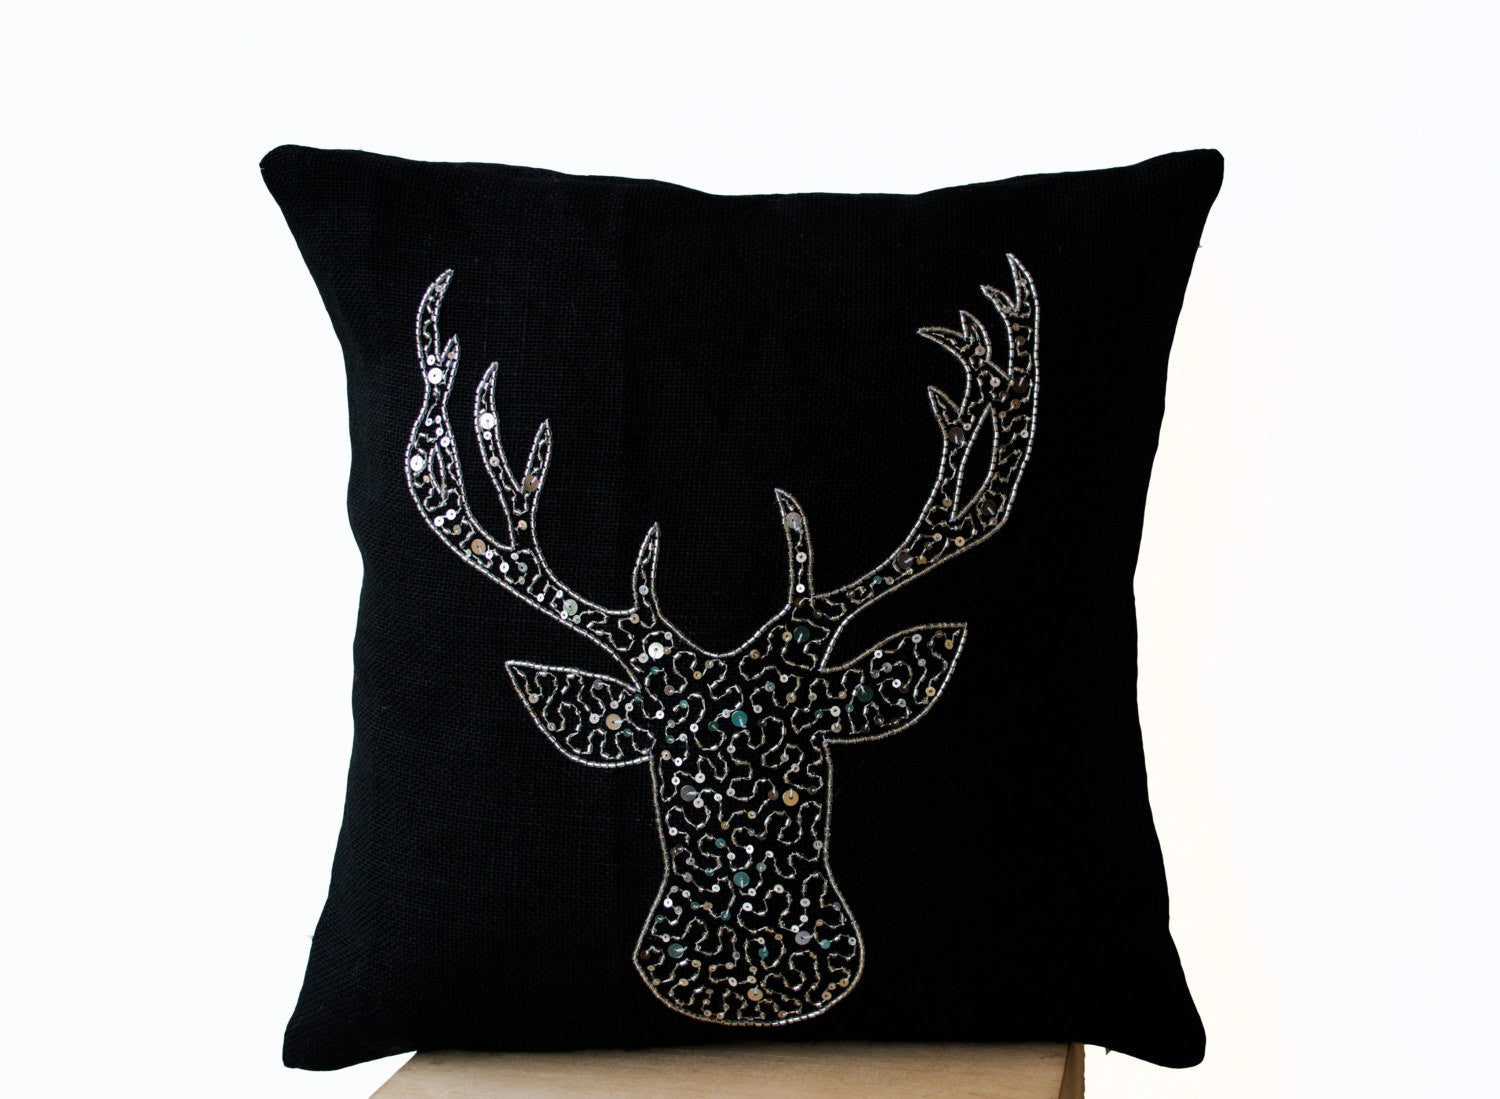 Handmade burlap pillows with embroidery and silver sequin